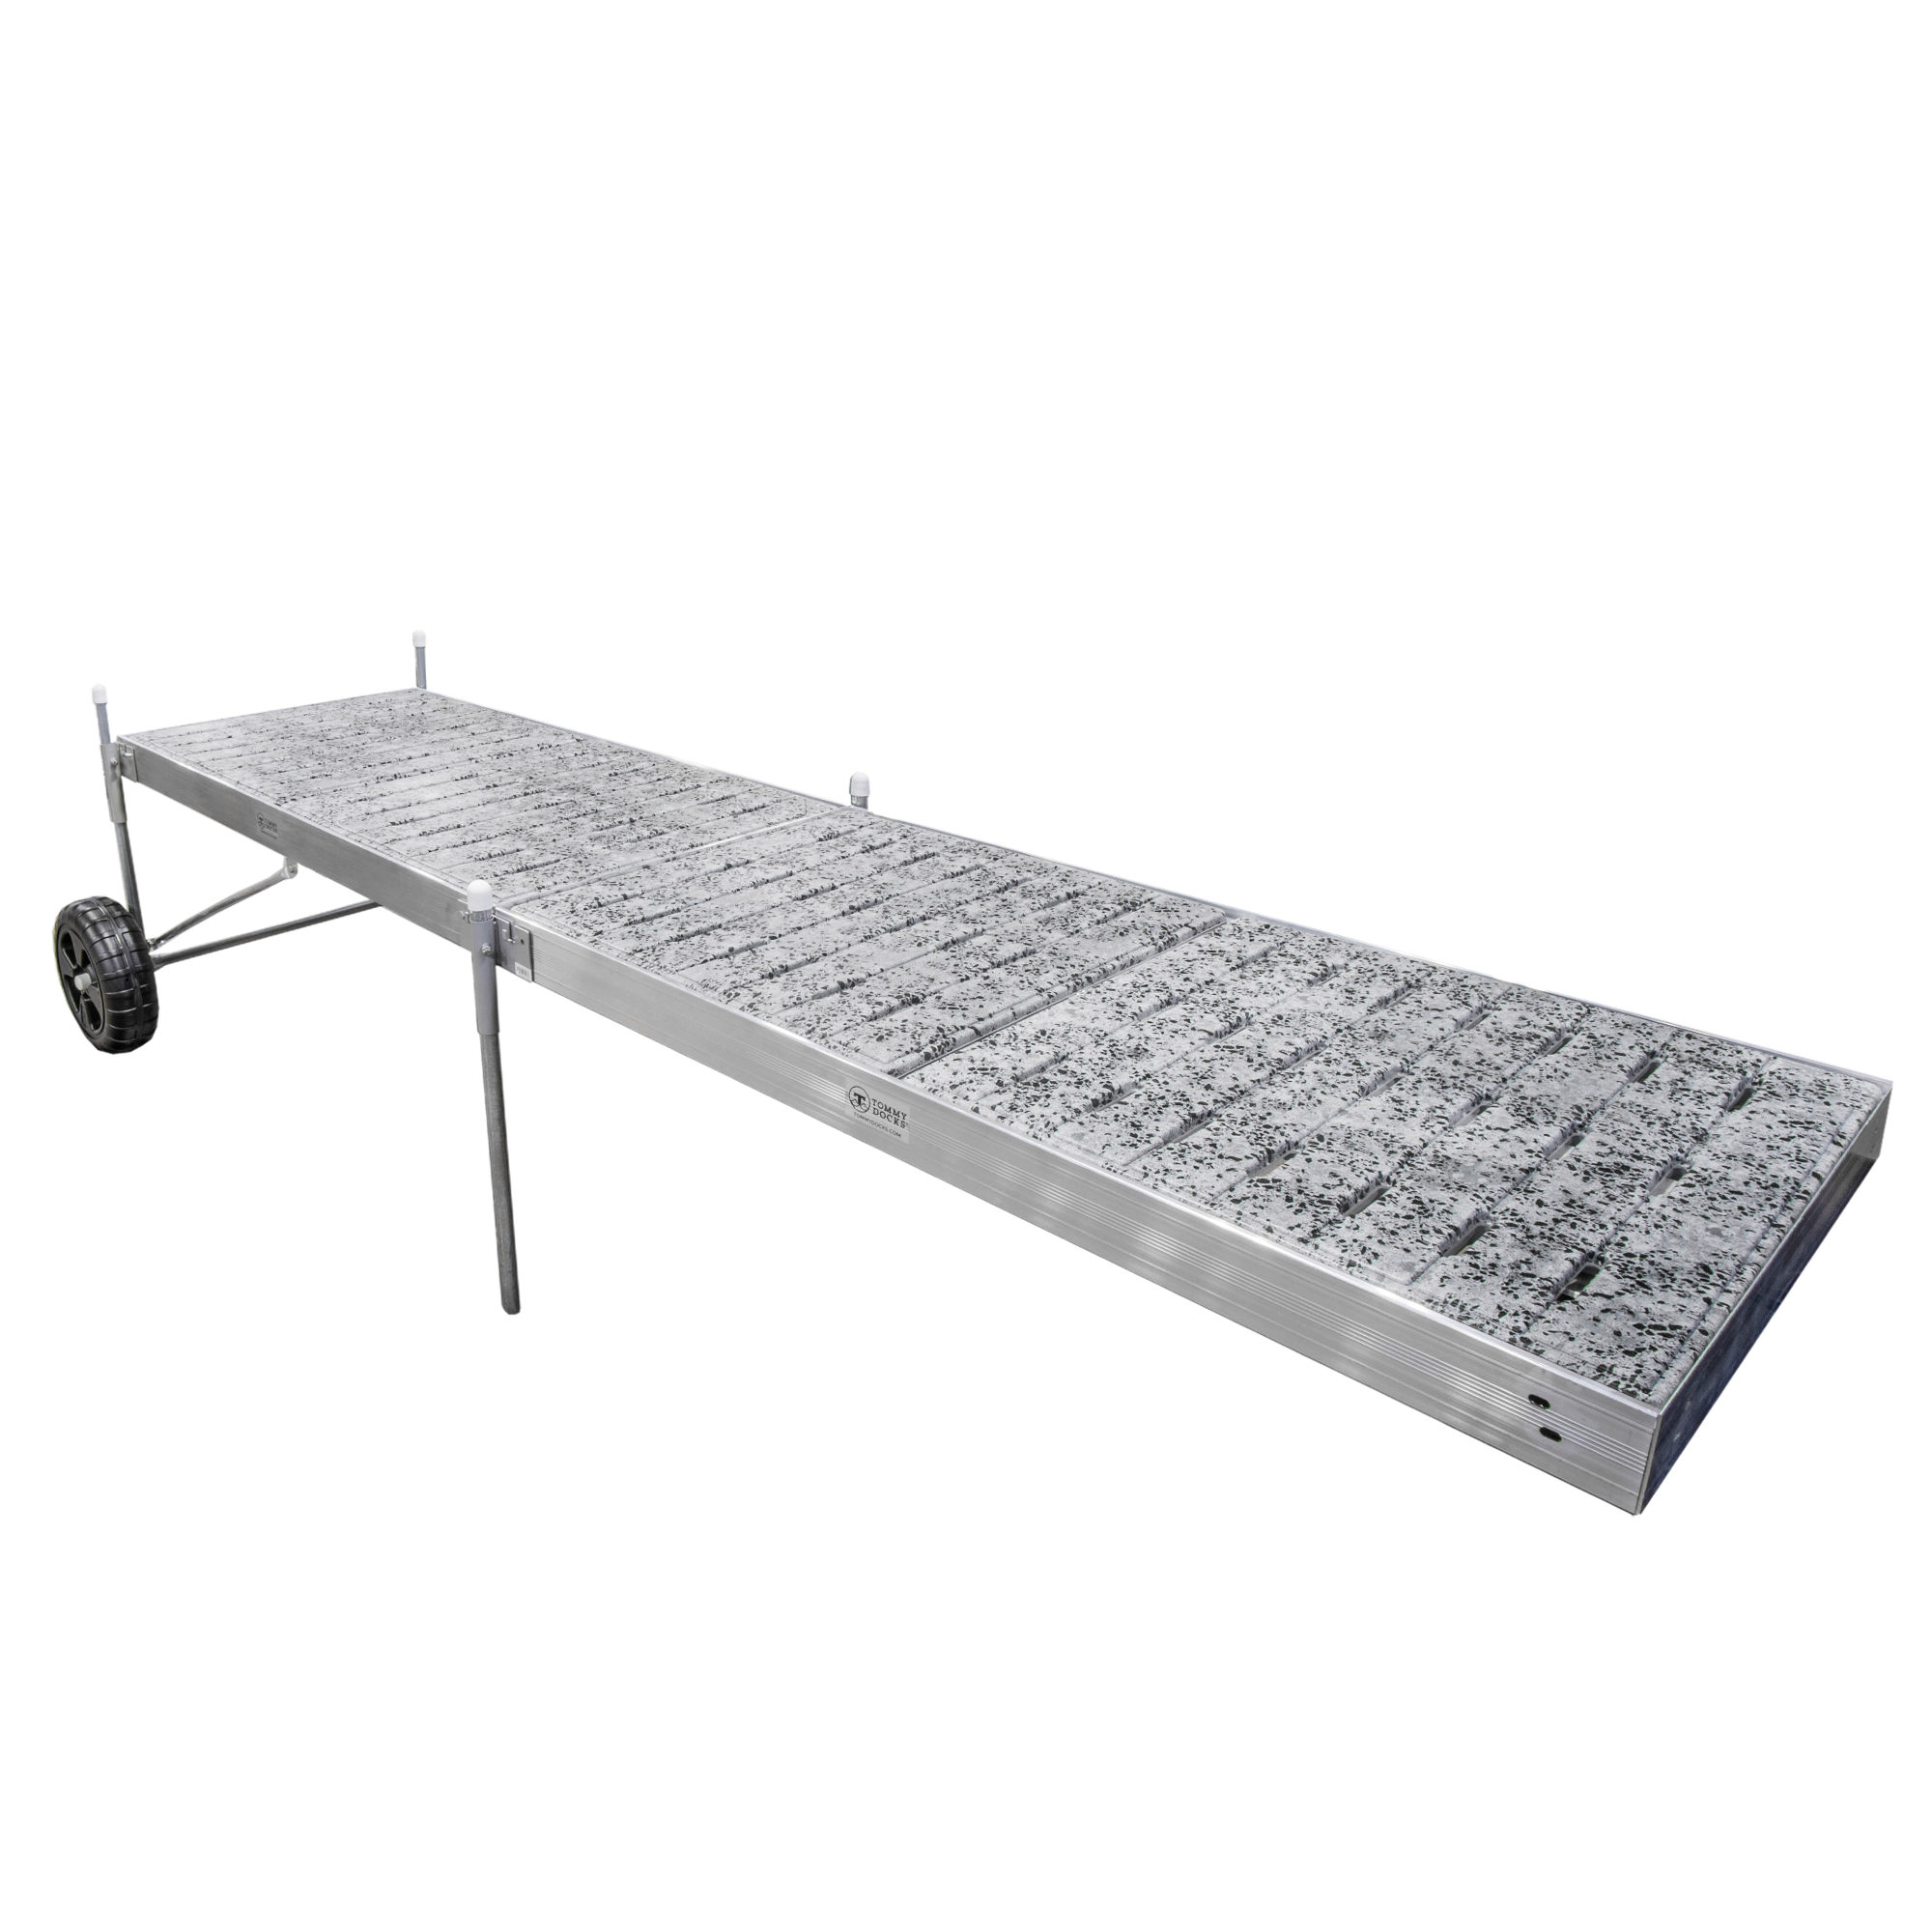 16' Roll-In-Dock Straight Aluminum Frame with Terrazzo Removable Decking Complete Dock Package